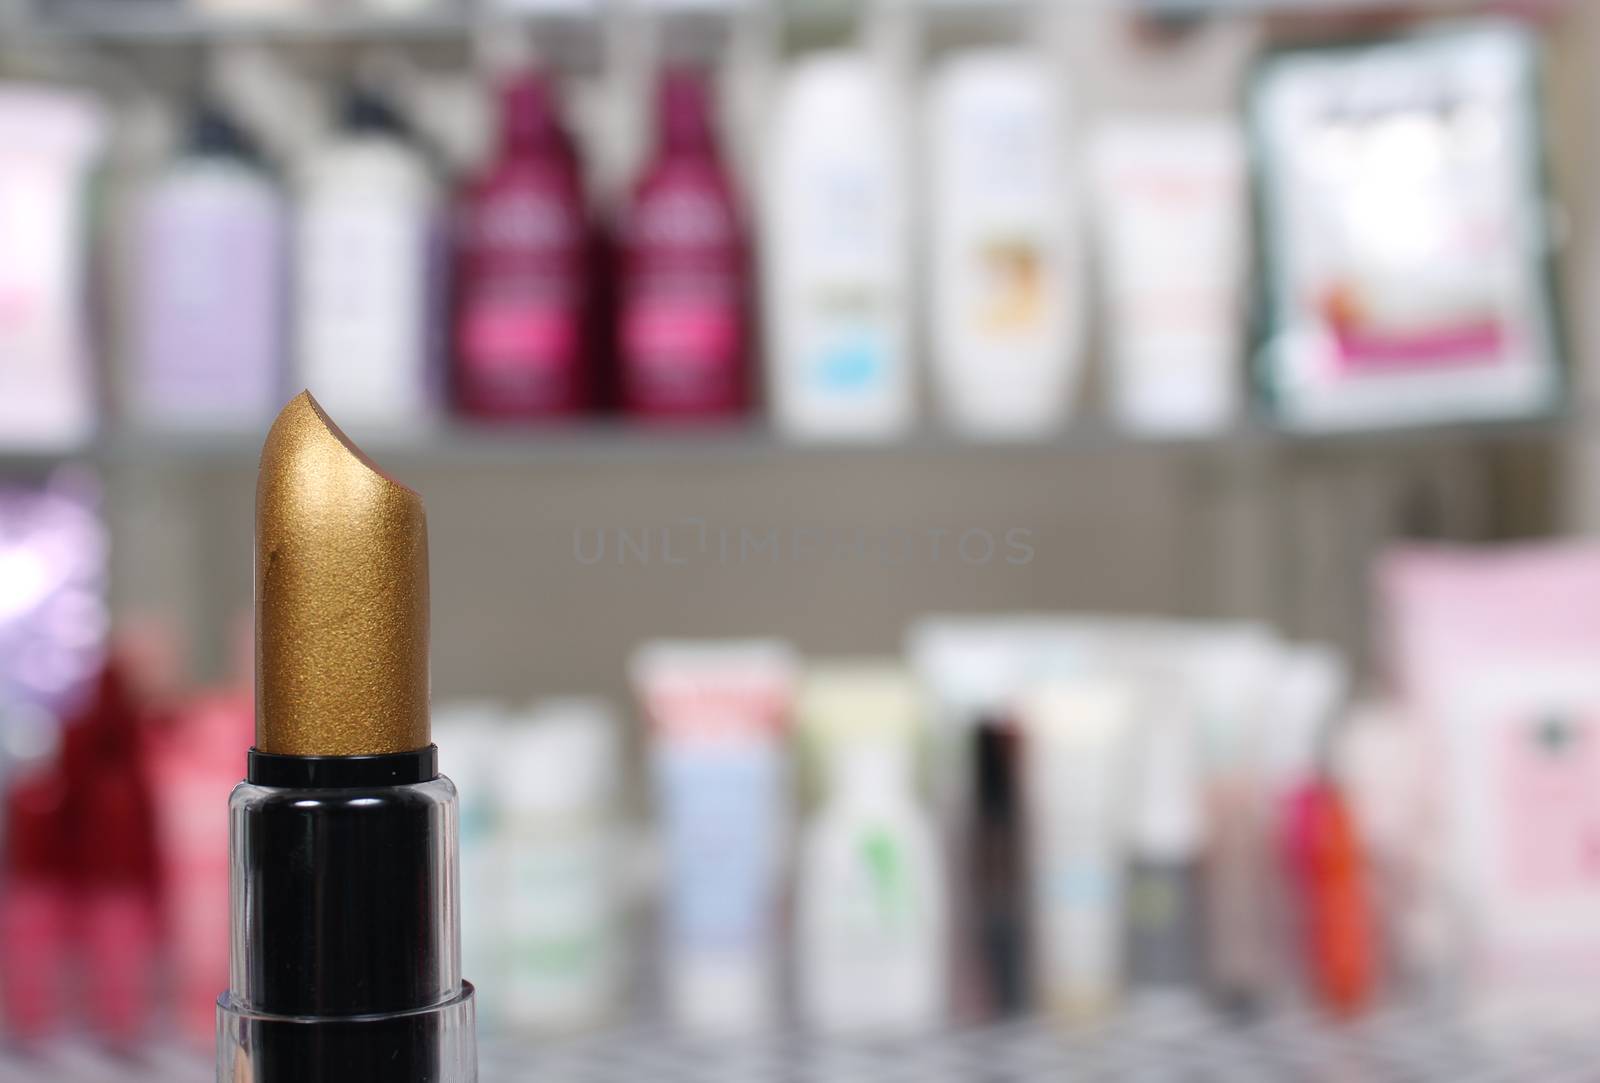 Cosmetics Counter With Various Beauty Products in Backgrounds by Marti157900